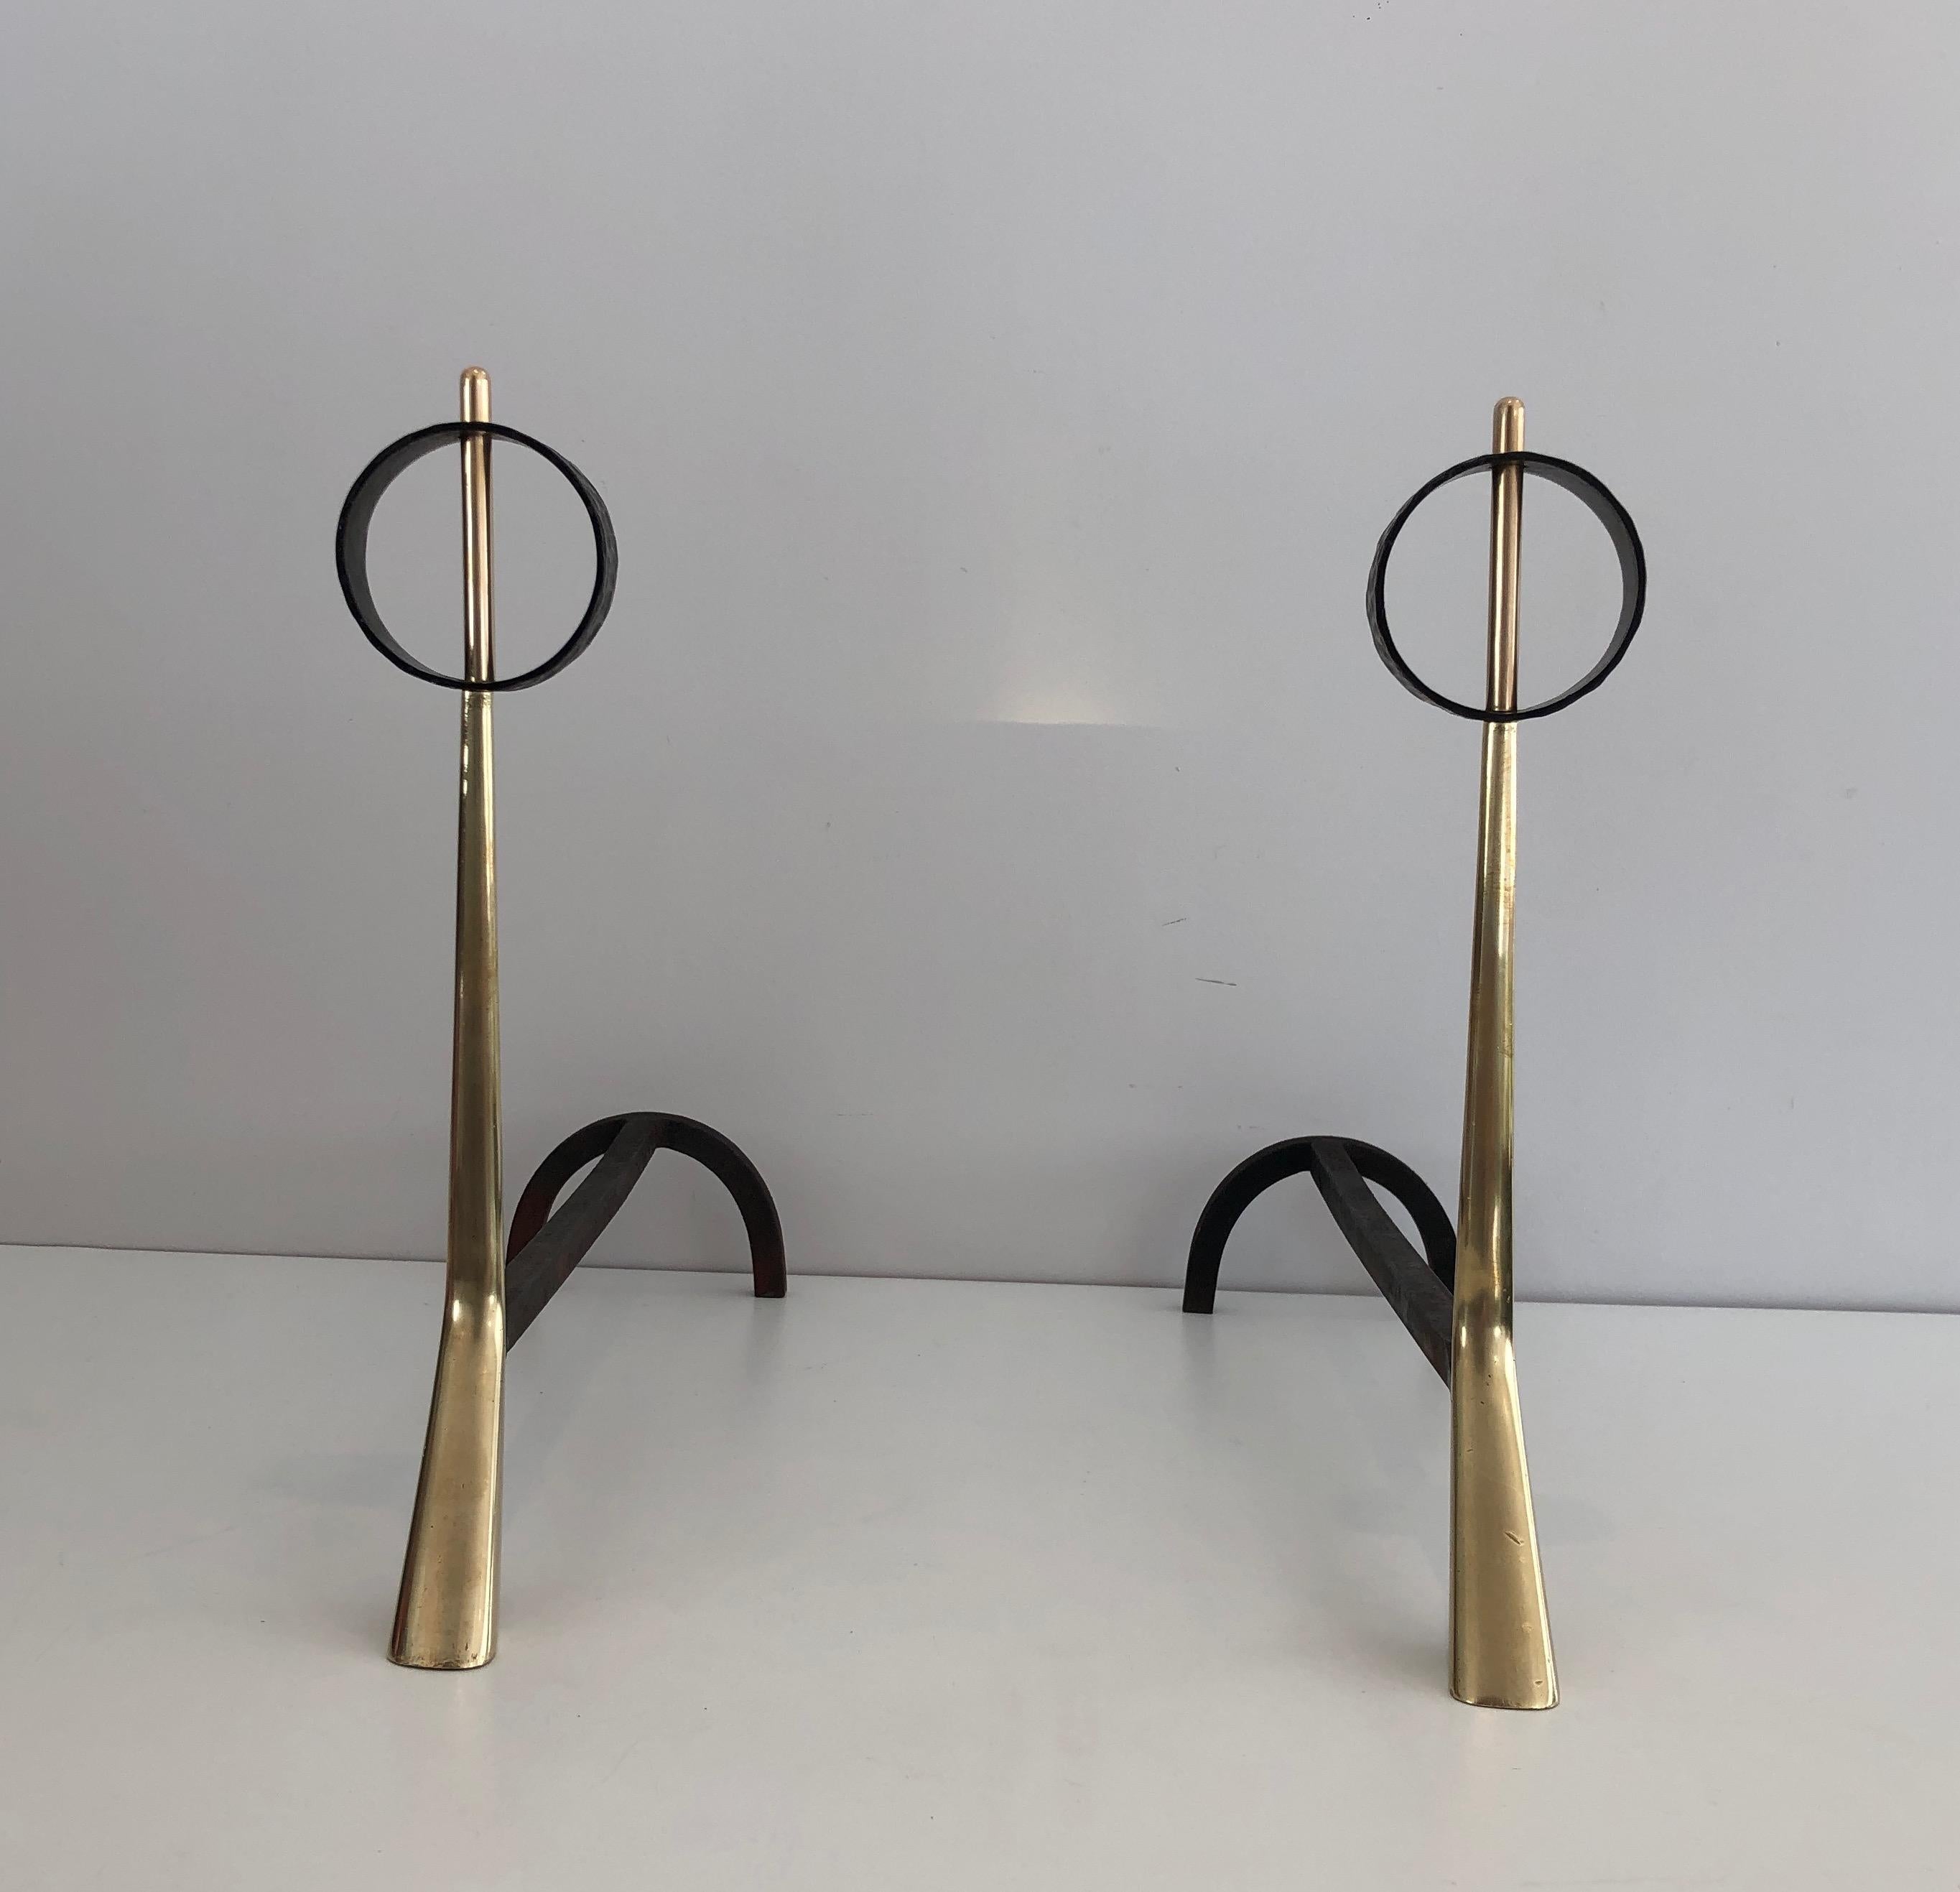 Pair of Modernist Bronze and Wrought Iron Andirons, Italian, circa 1950 For Sale 8